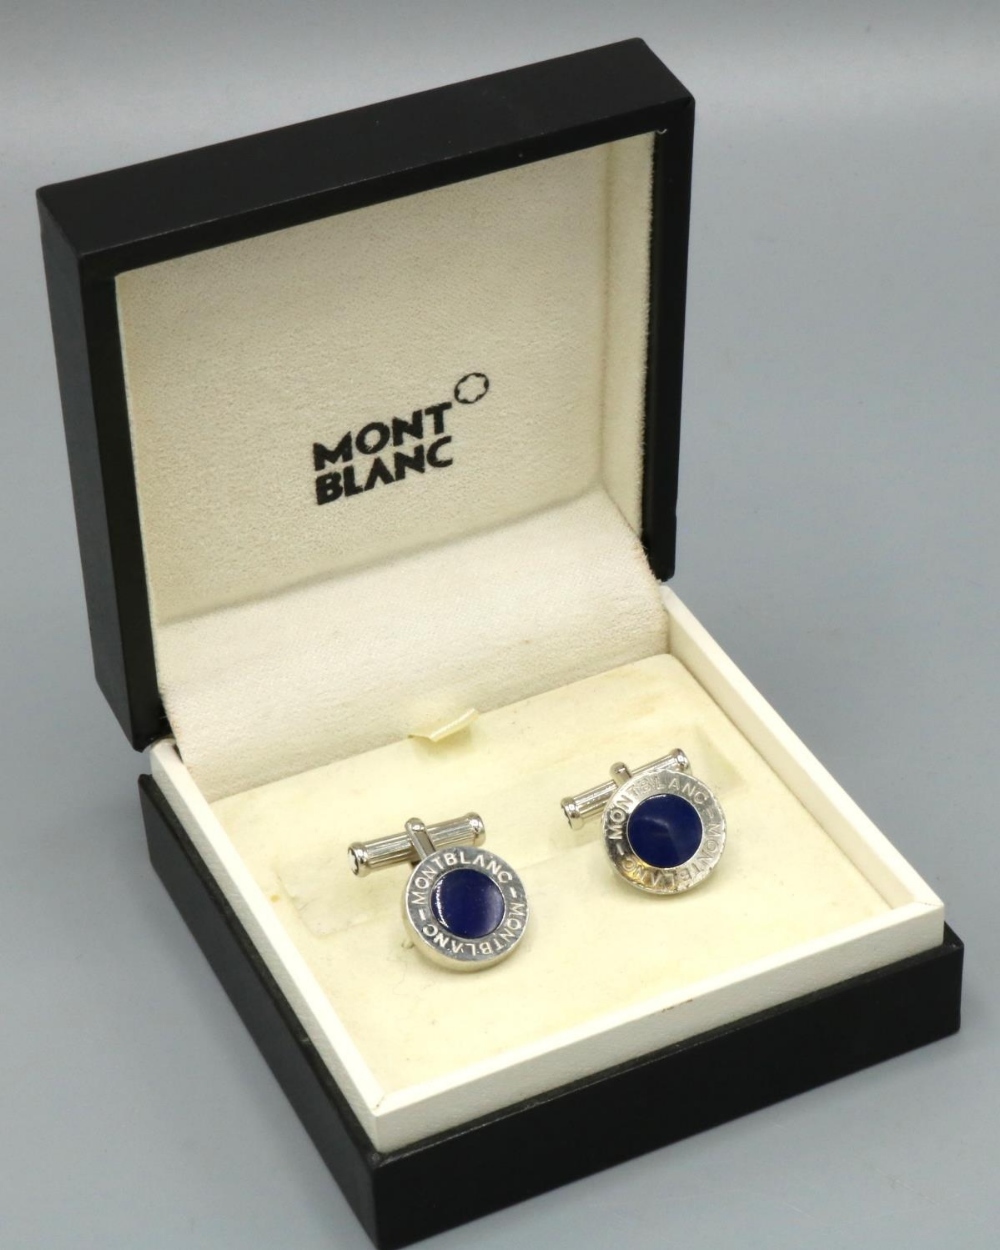 Pair of Montblanc chrome circular cufflinks, with blue inset in Montblanc surround, stamped